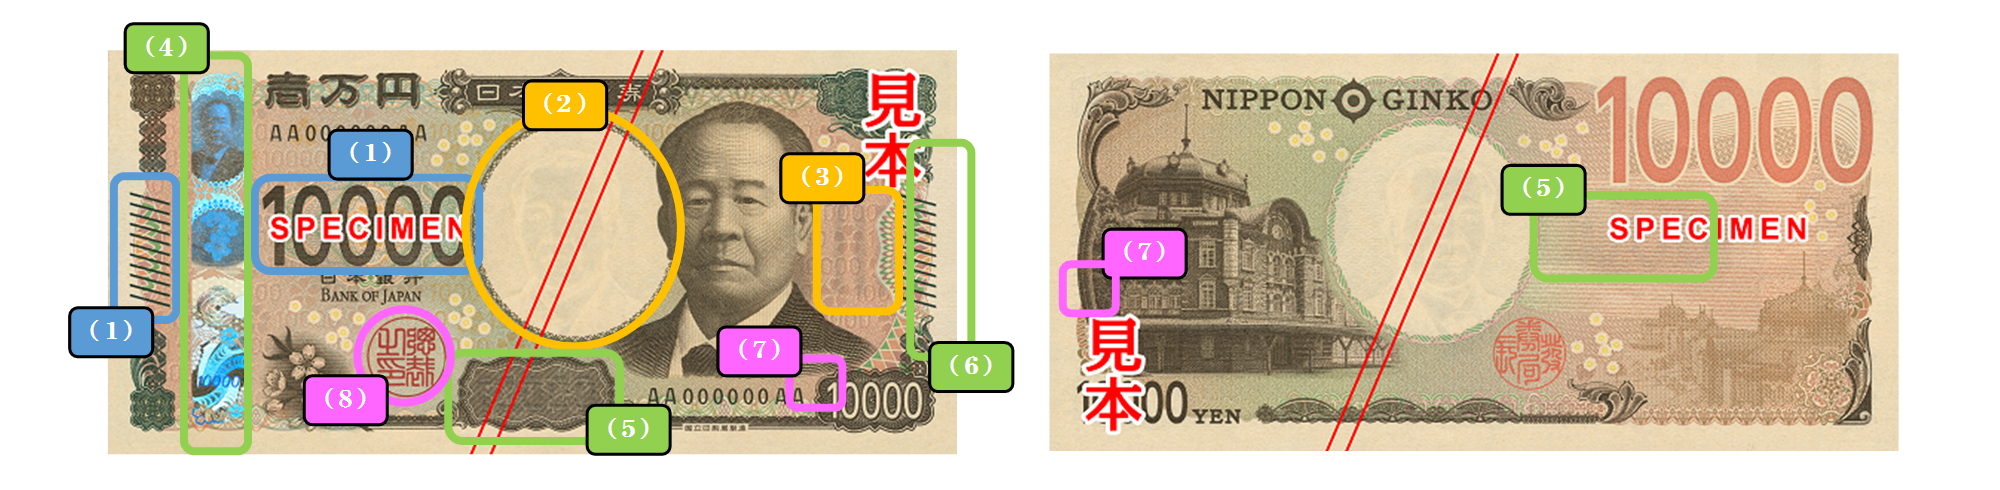 Images of the front and back of the 10,000 yen note.